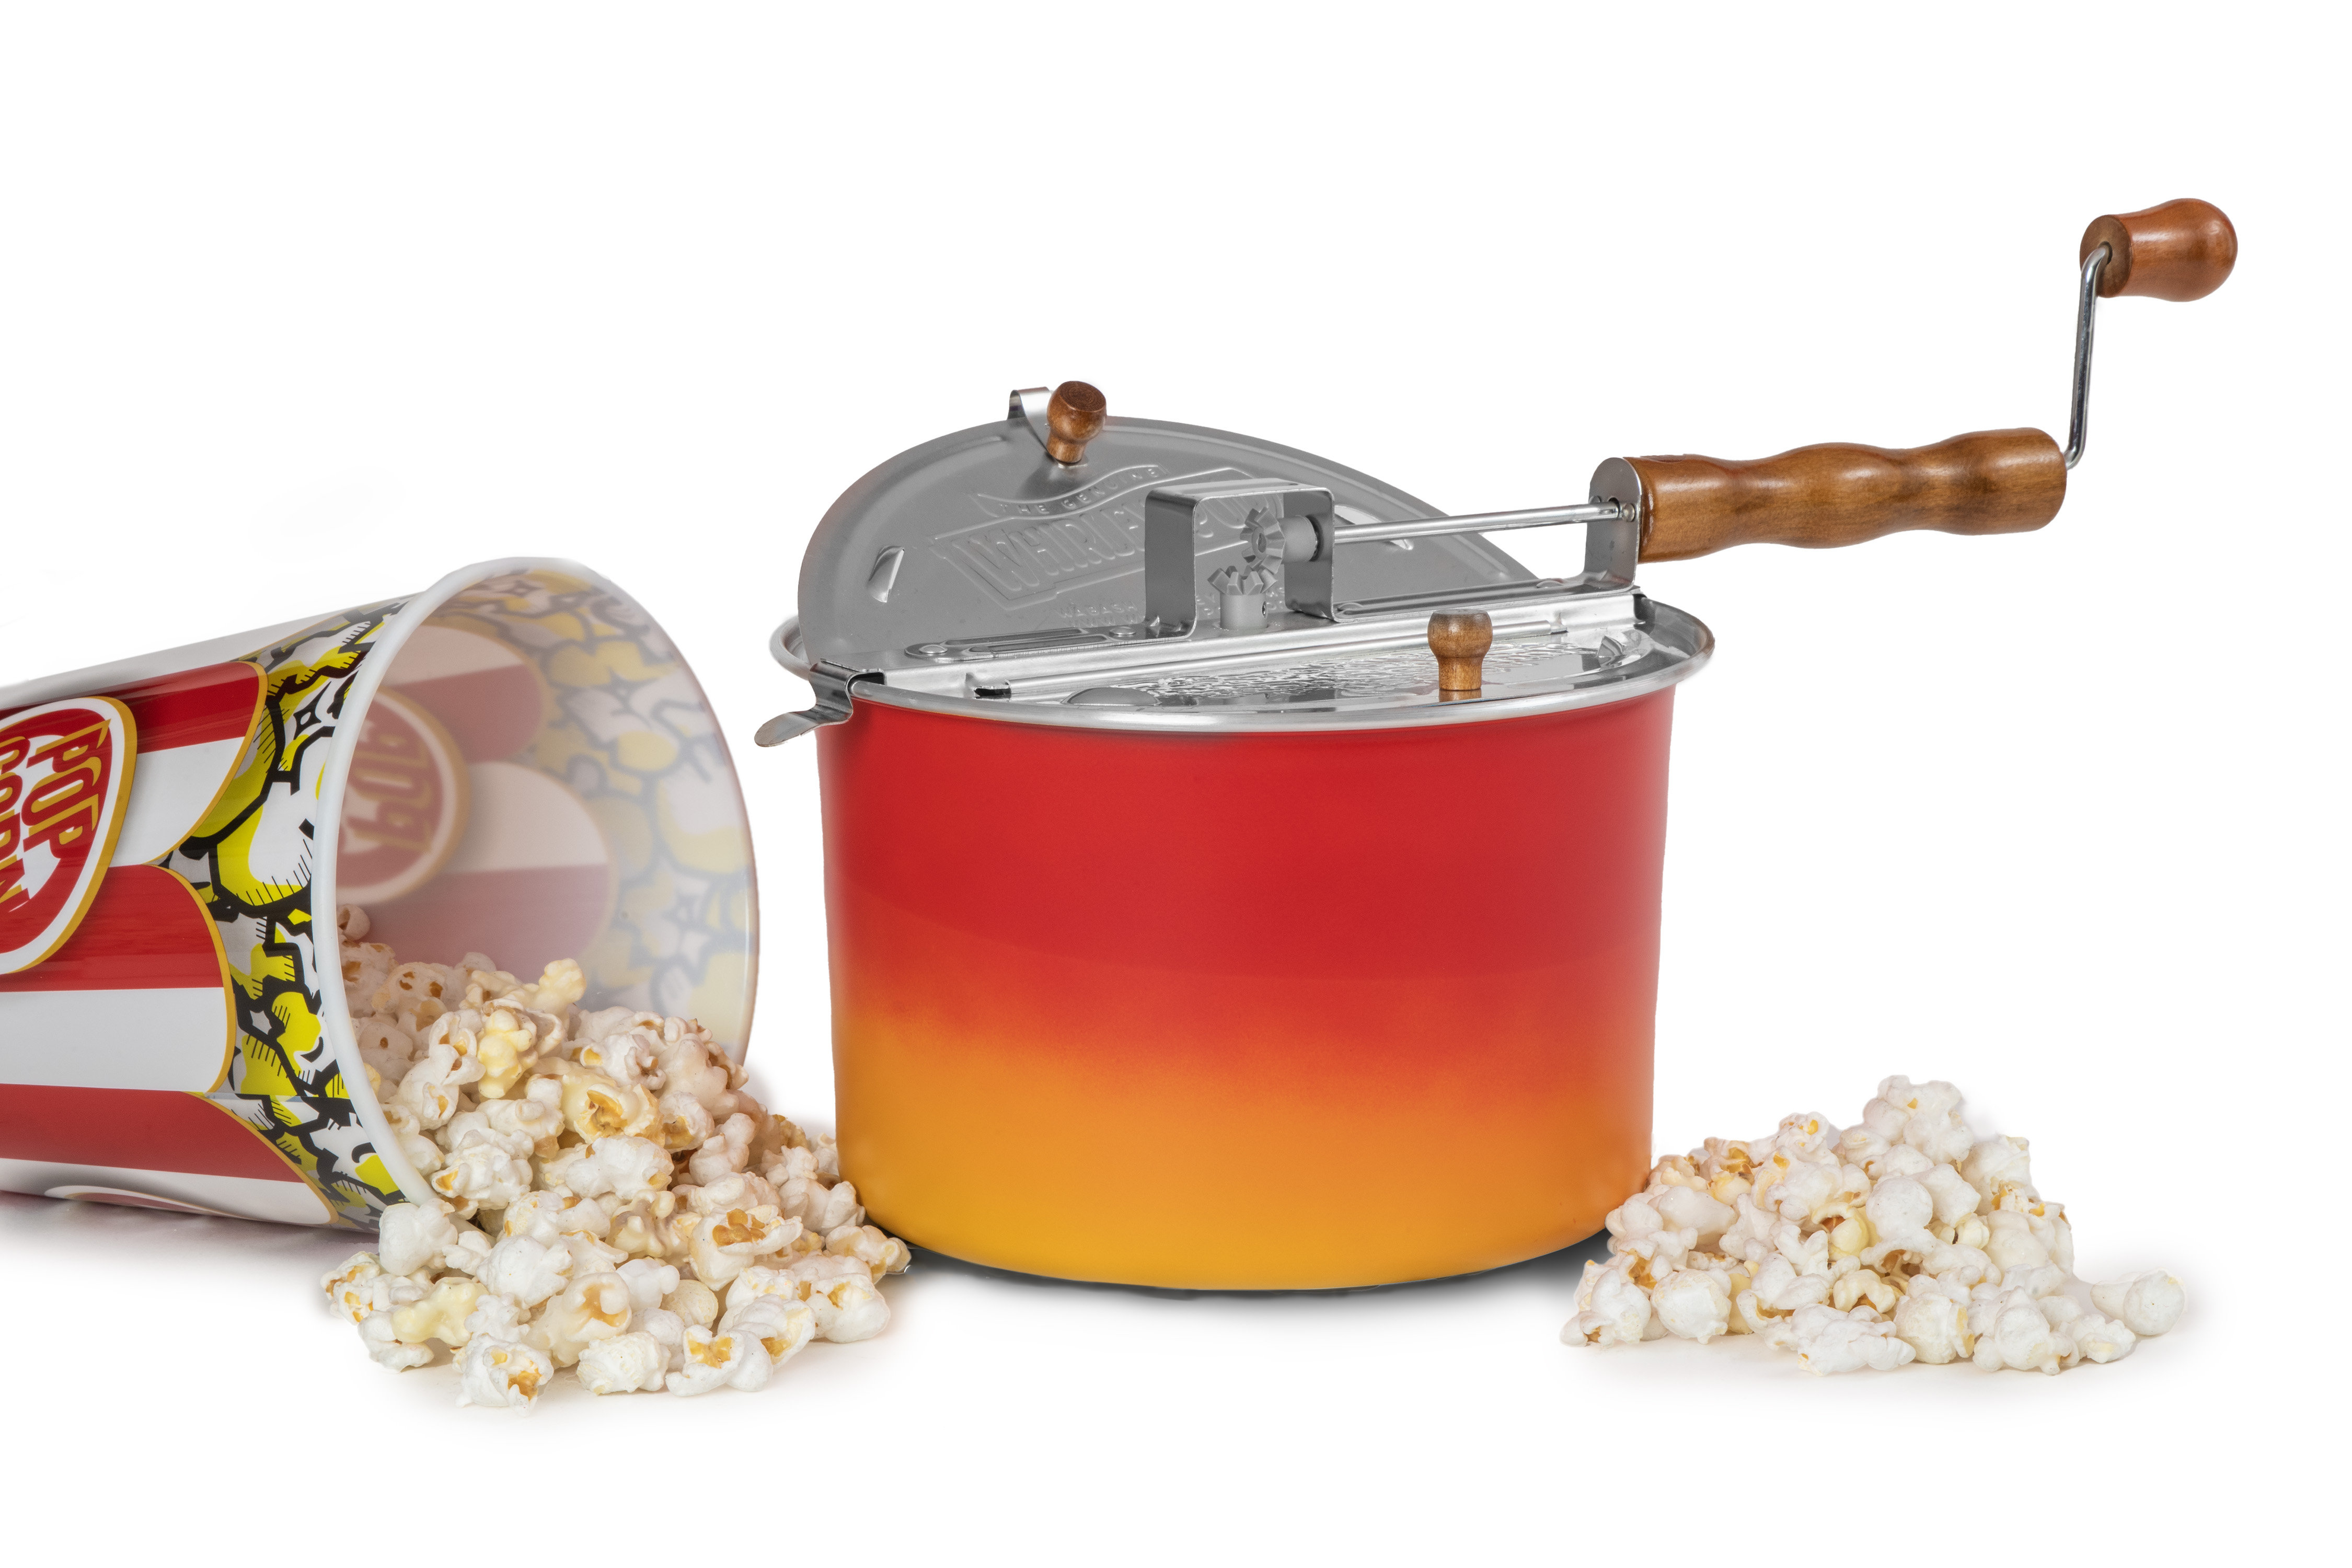 Wabash Valley Farms Whirley-Pop Stovetop Popcorn Popper – The Jazz Chef